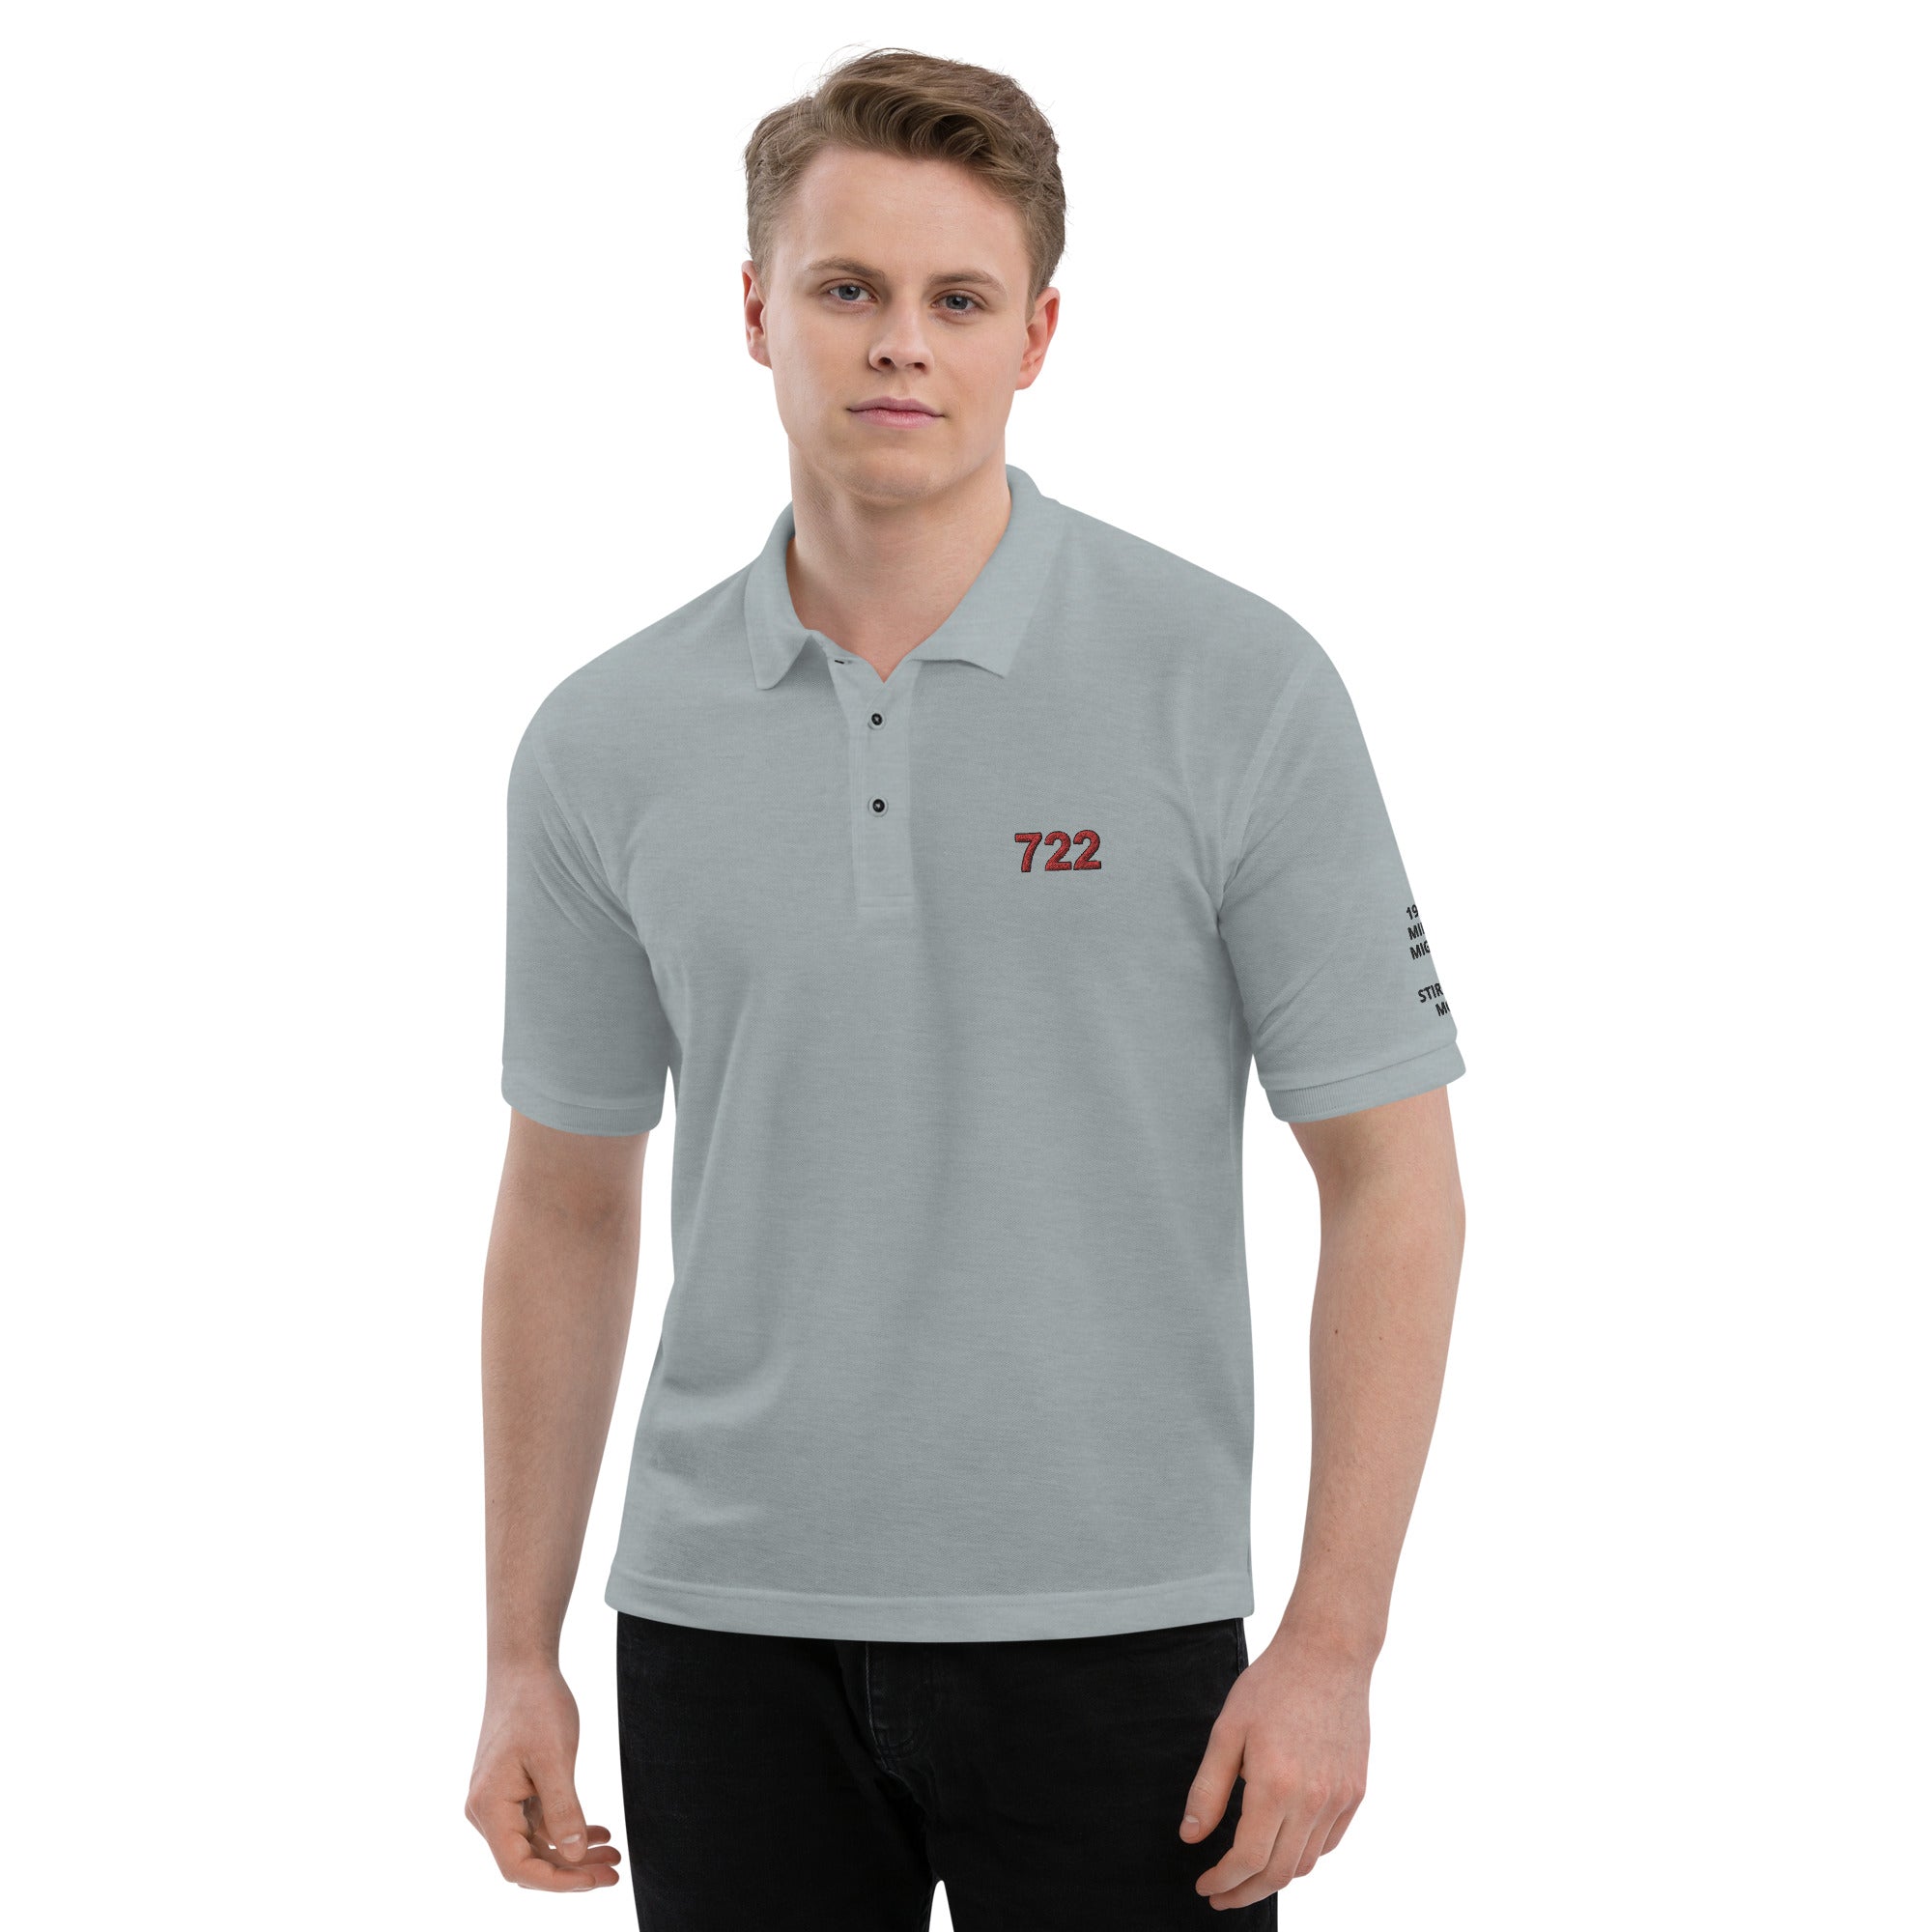 722: Stirling Moss at Mille Miglia 1955 Mercedes SLR light grey polo shirt front full